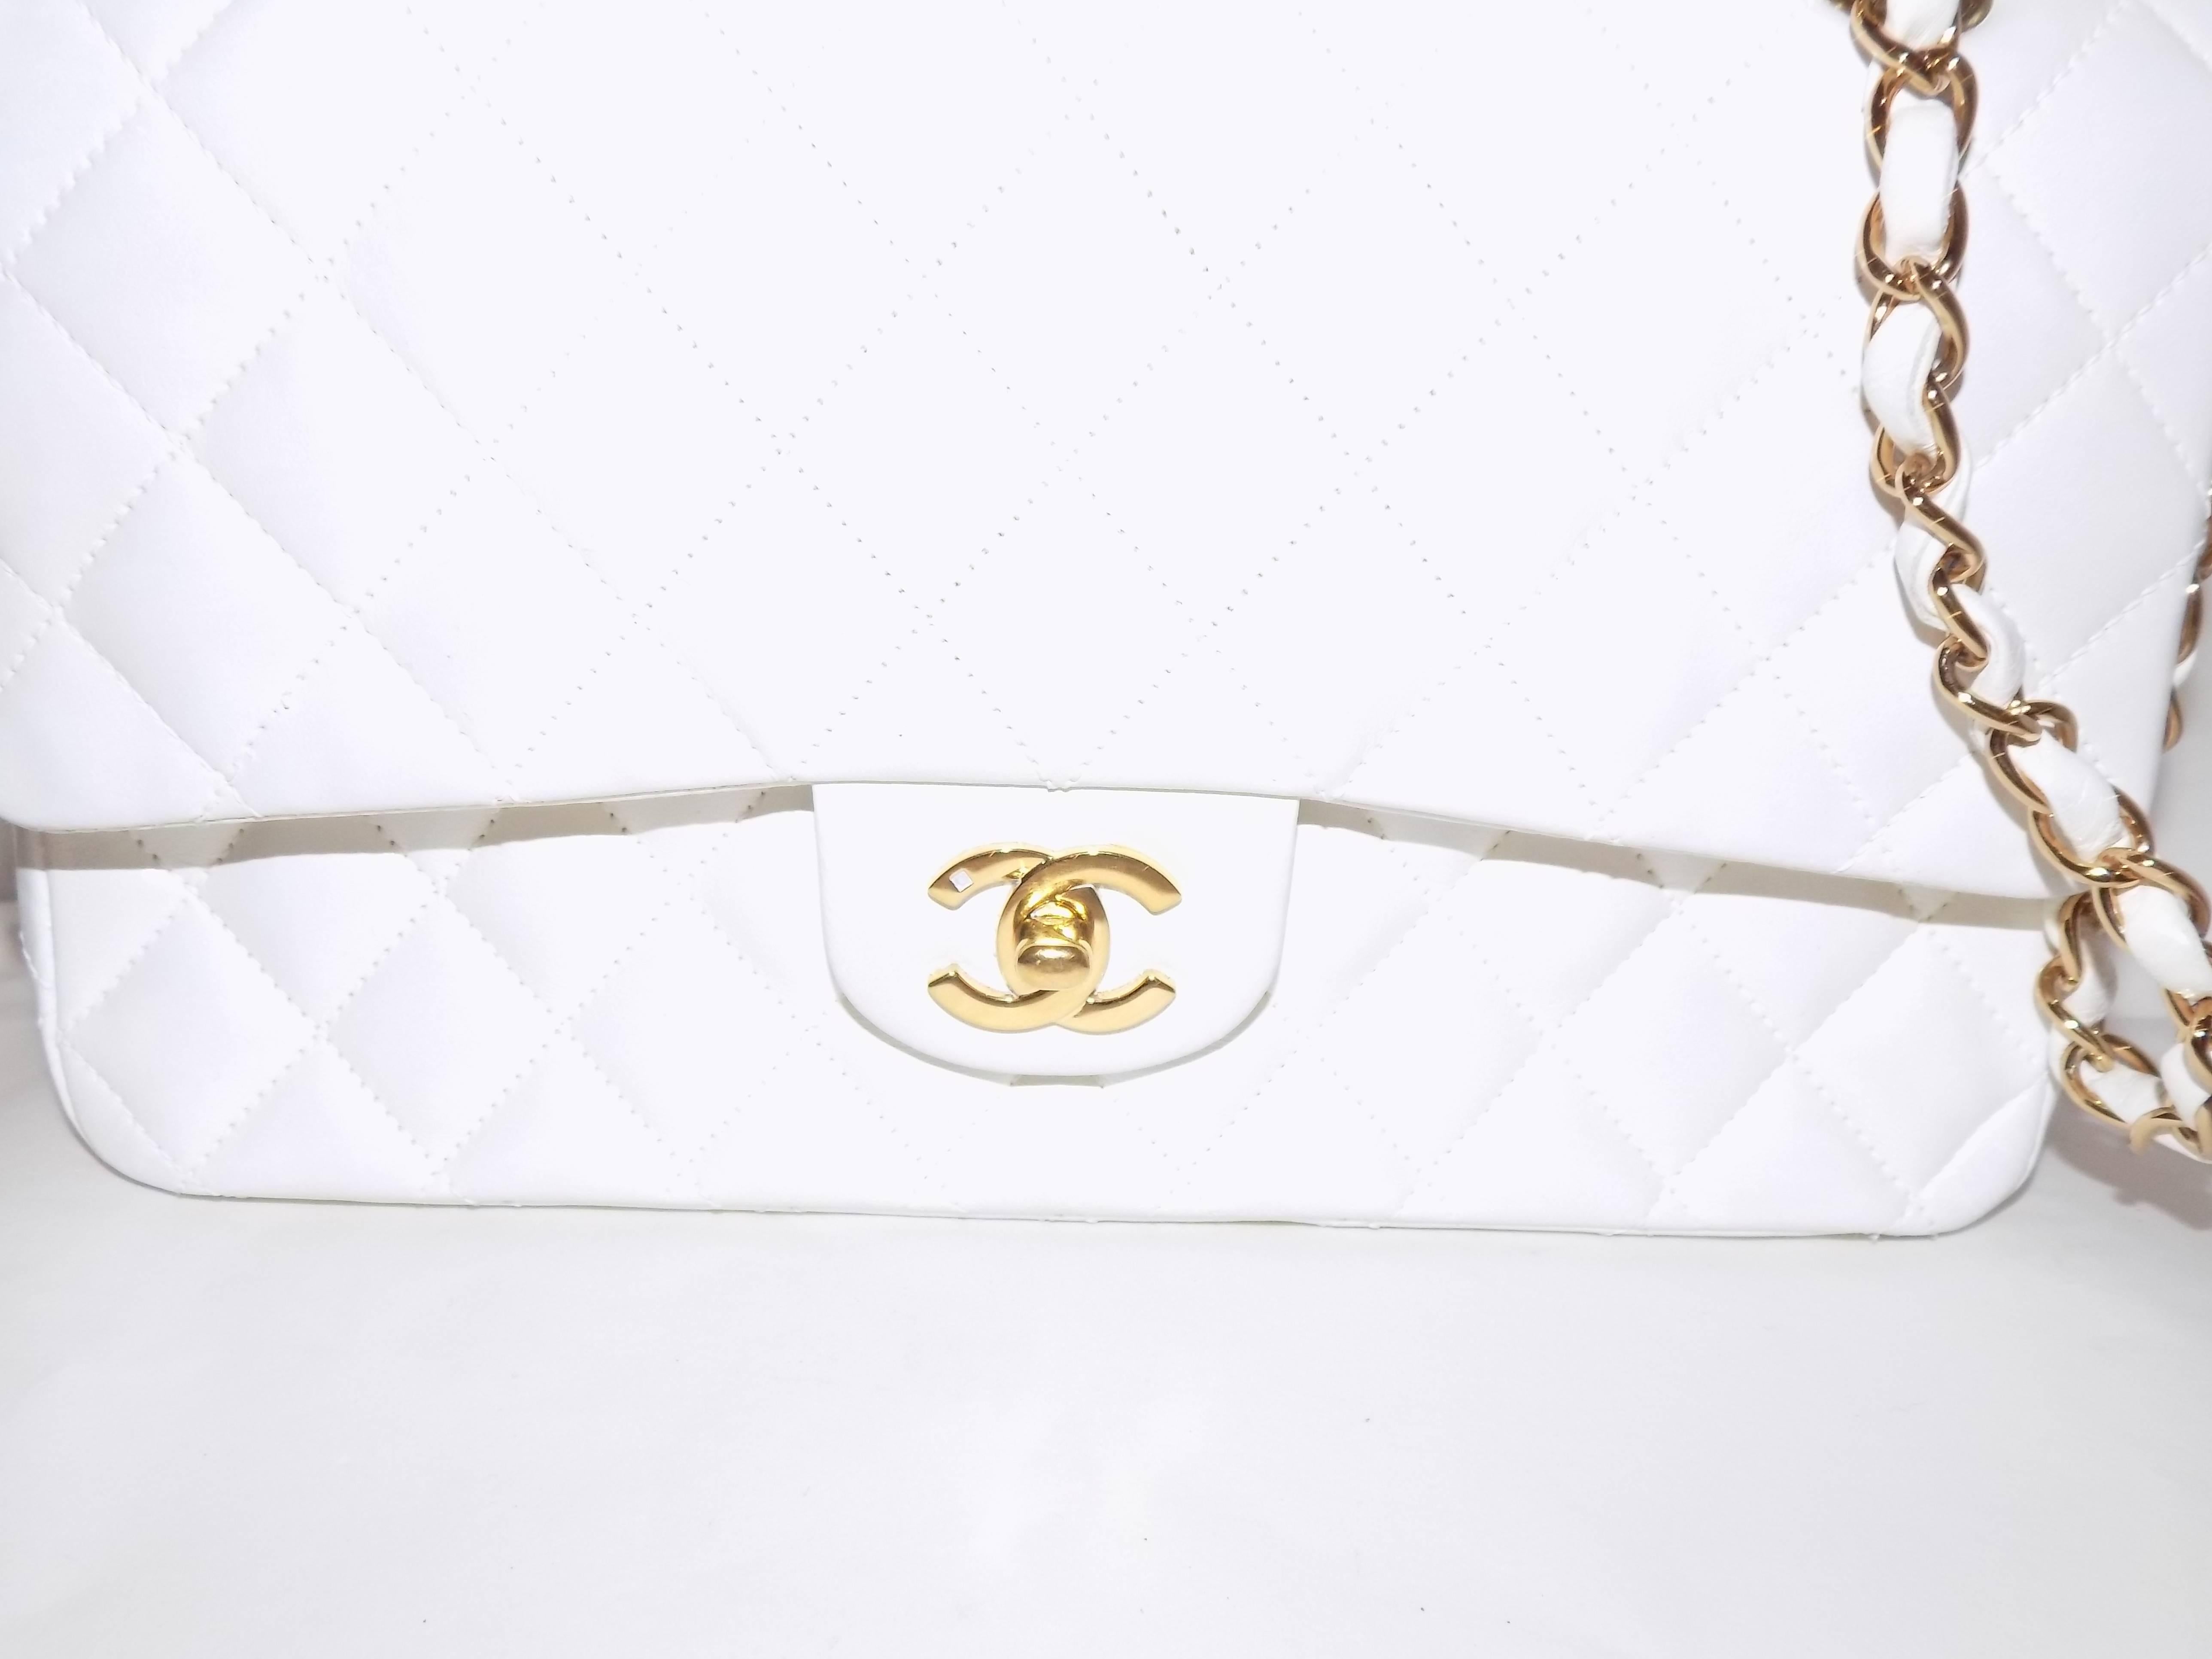 Chanel Classic Flap medium calf leather and gold  hardware in AMAZING condition. No obvious sign of scratches or marks, shape stands strong, soft and quilts plumped. Hardware shiny and new. Double flap. Dust bag included. Perfect for summer. 